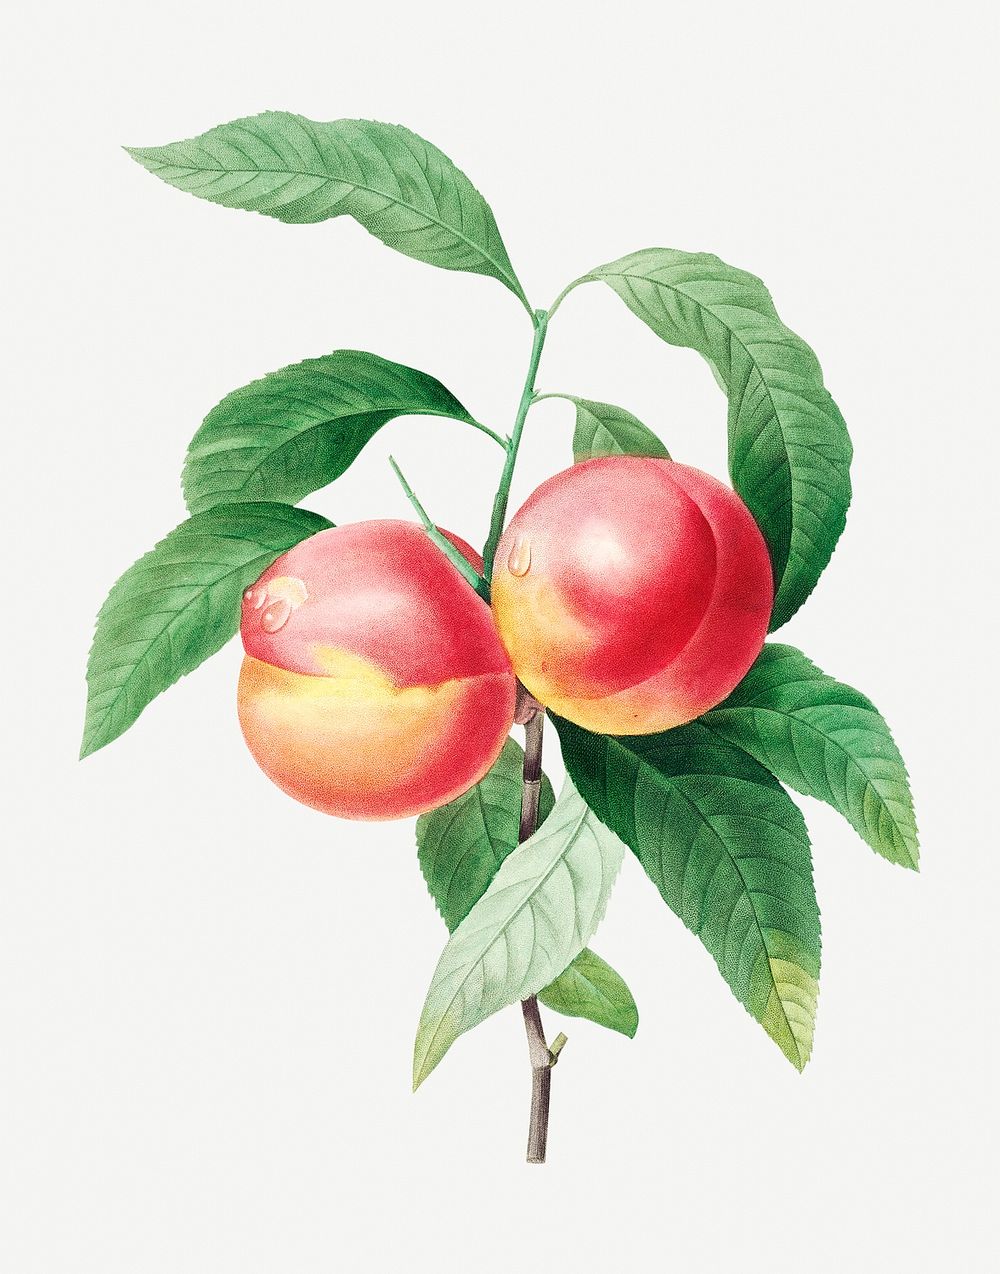 Peaches on a branch psd botanical illustration, remixed from artworks by Pierre-Joseph Redout&eacute;